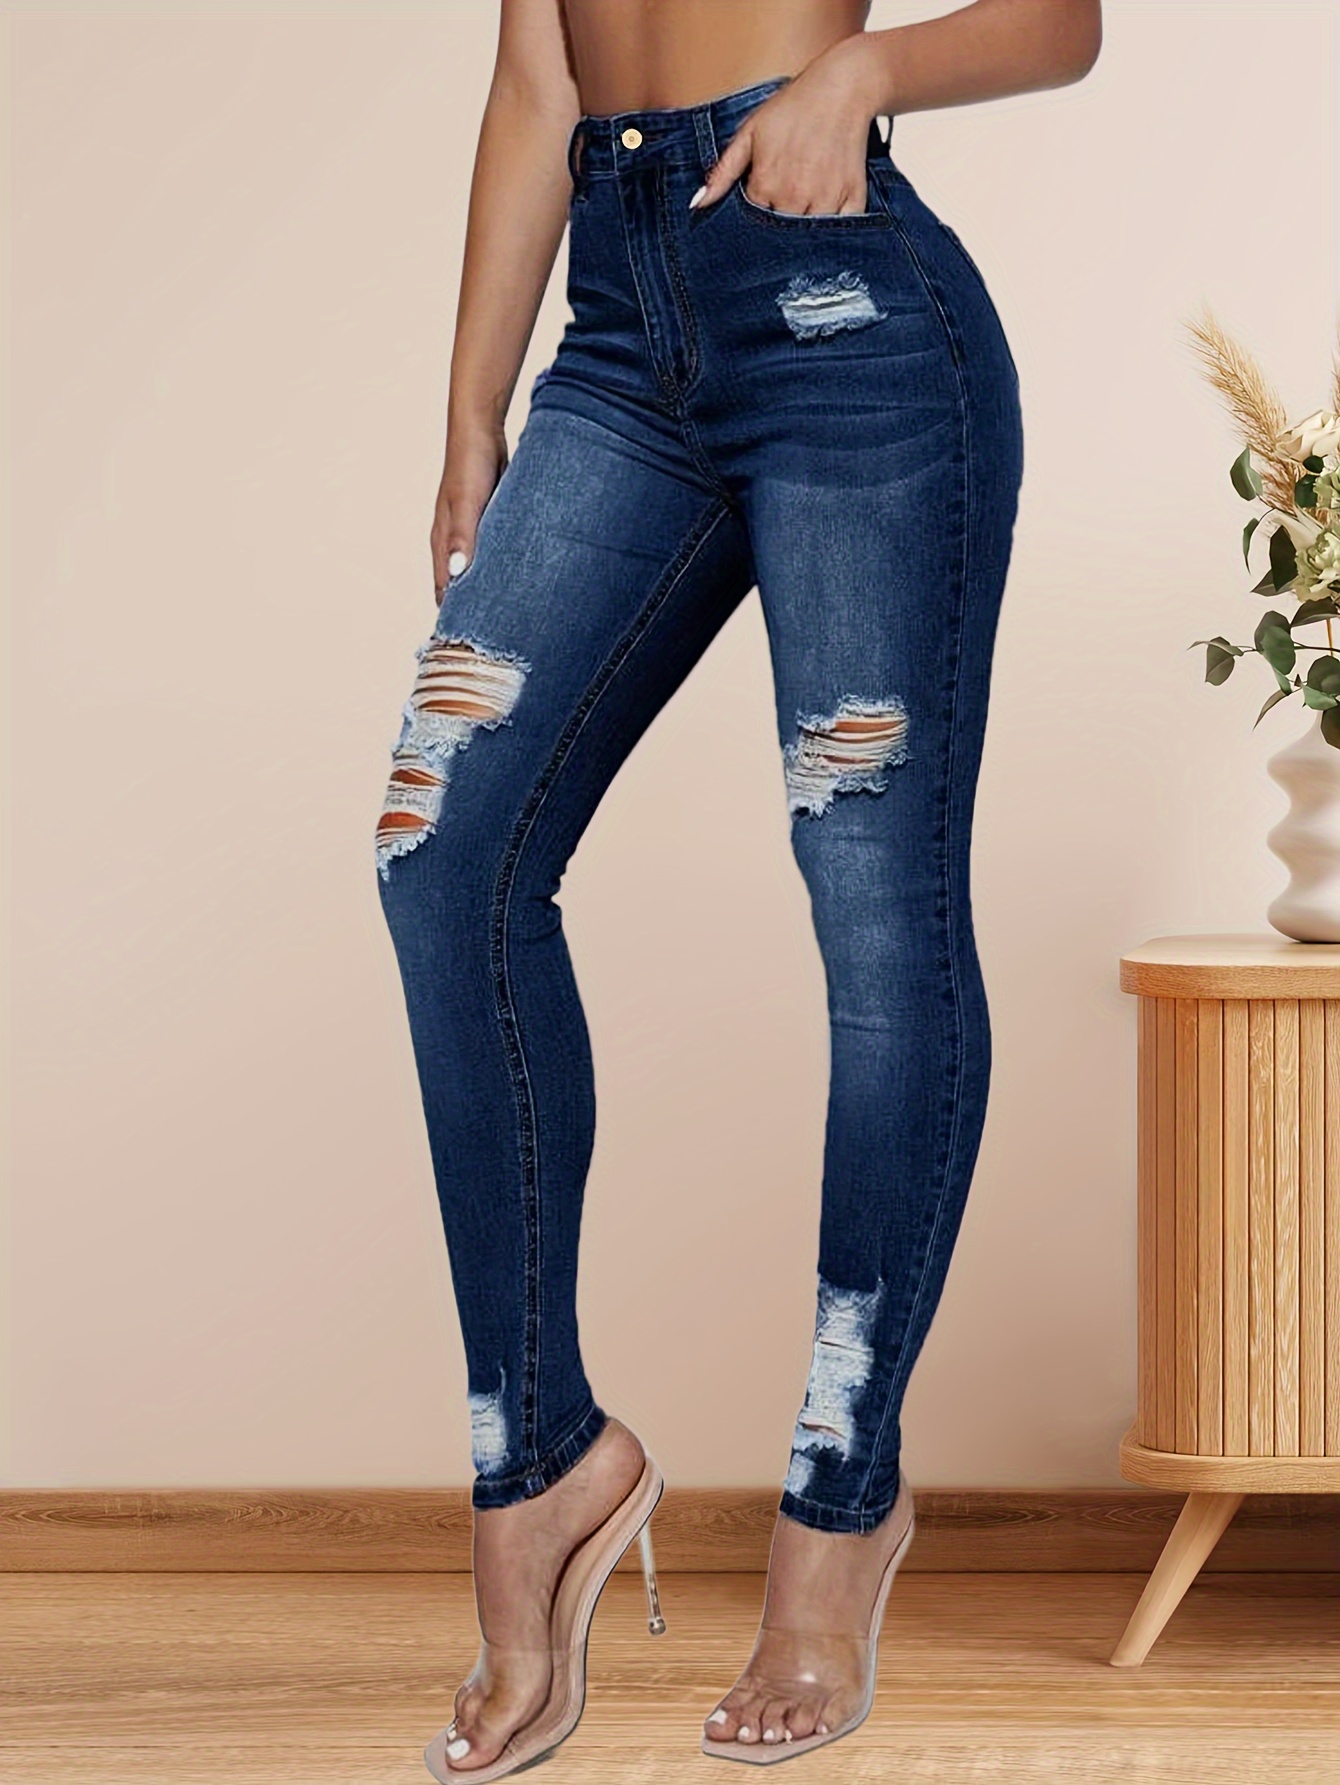 Blue Ripped Holes Skinny Jeans, Slim Fit High Stretch Distressed Tight  Jeans, Women's Denim Jeans & Clothing